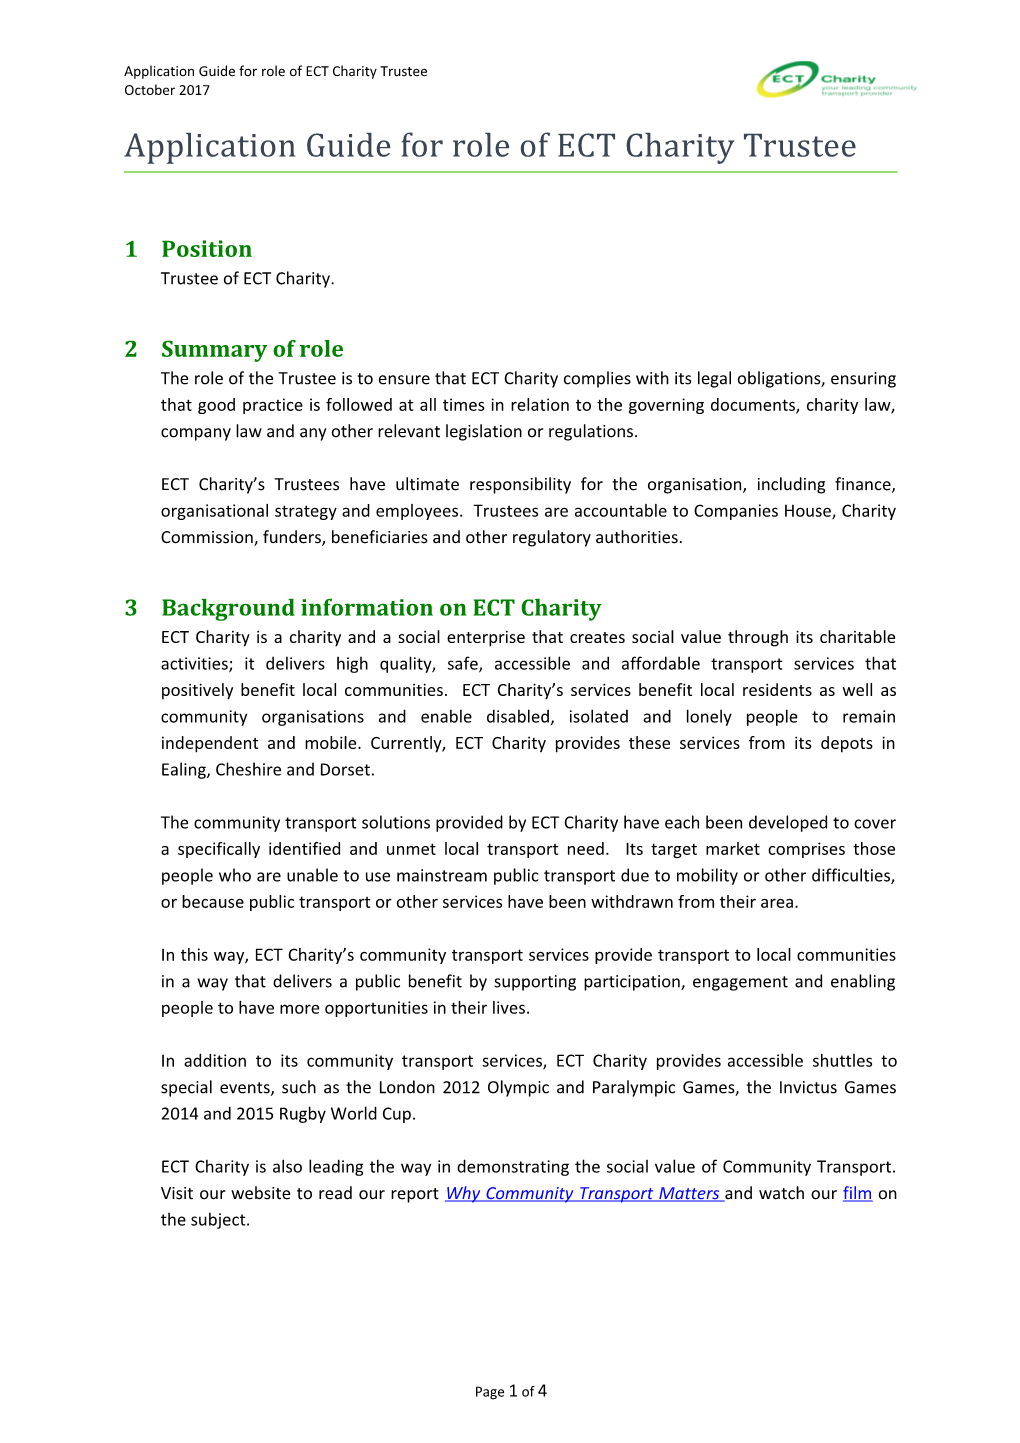 Application Guide for Role of ECT Charity Trustee